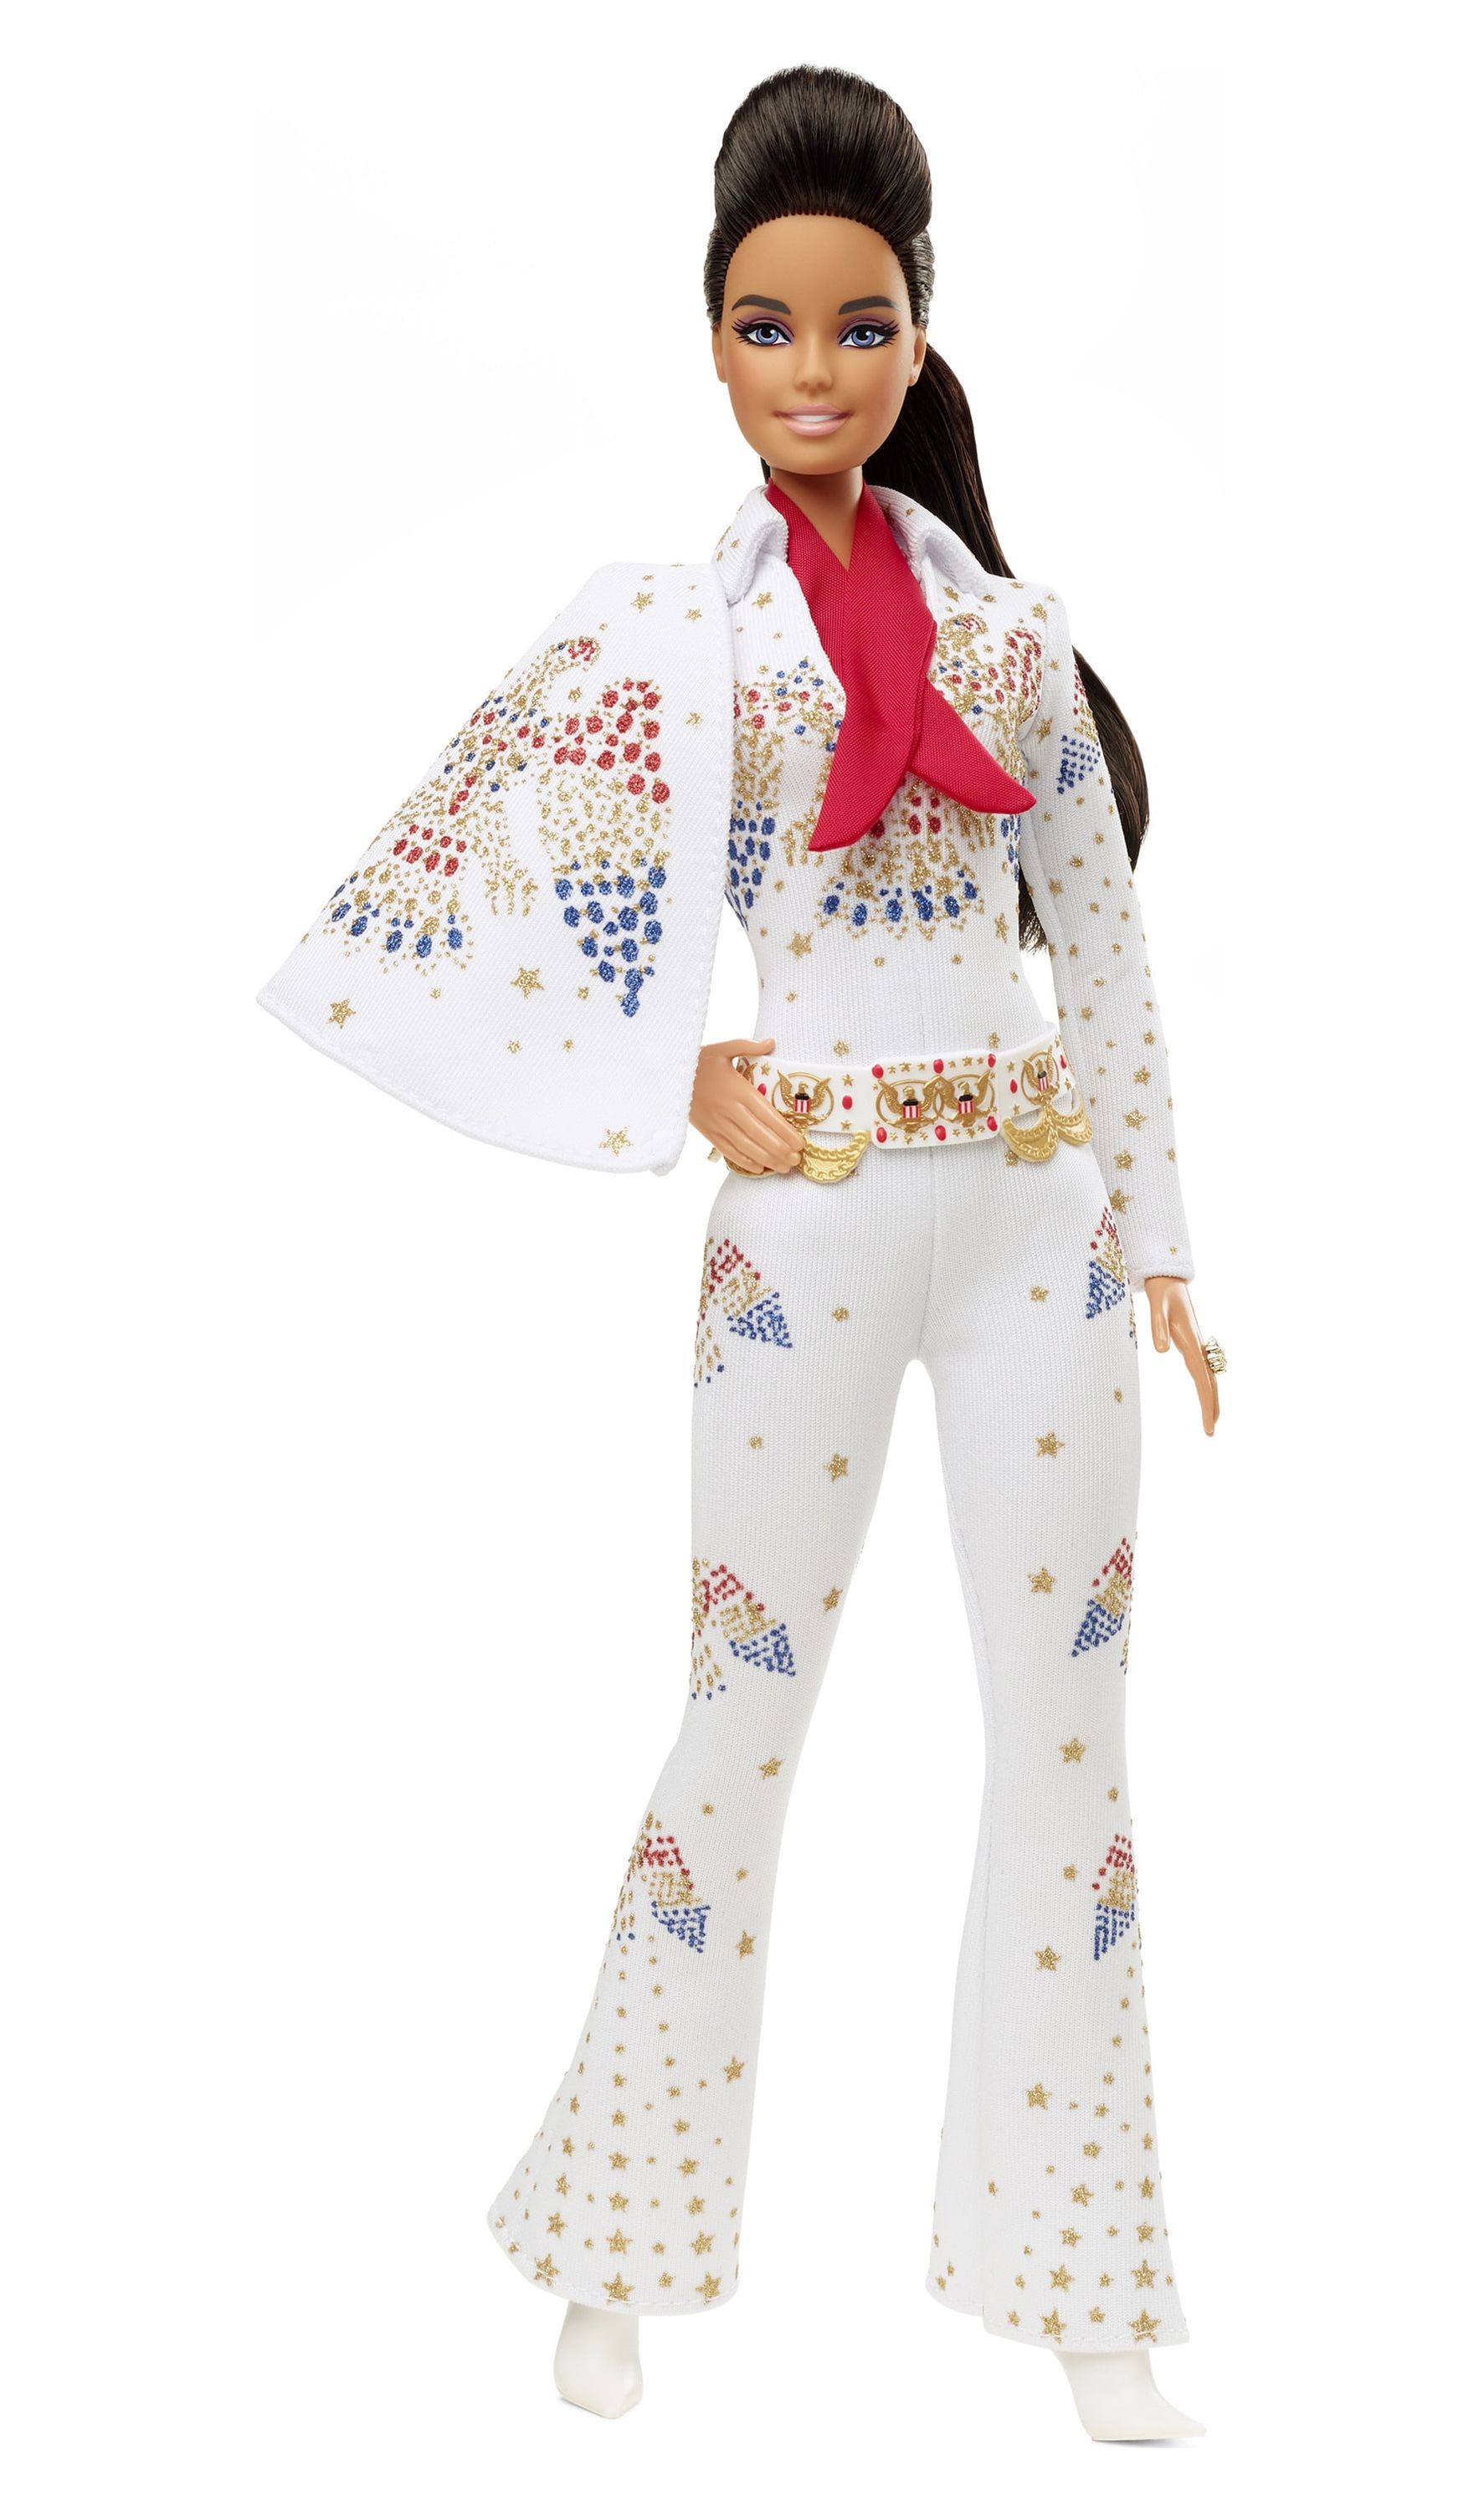 Barbie Signature Elvis Presley Collectible Barbie Doll Wearing "American Eagle" Jumpsuit - image 1 of 7